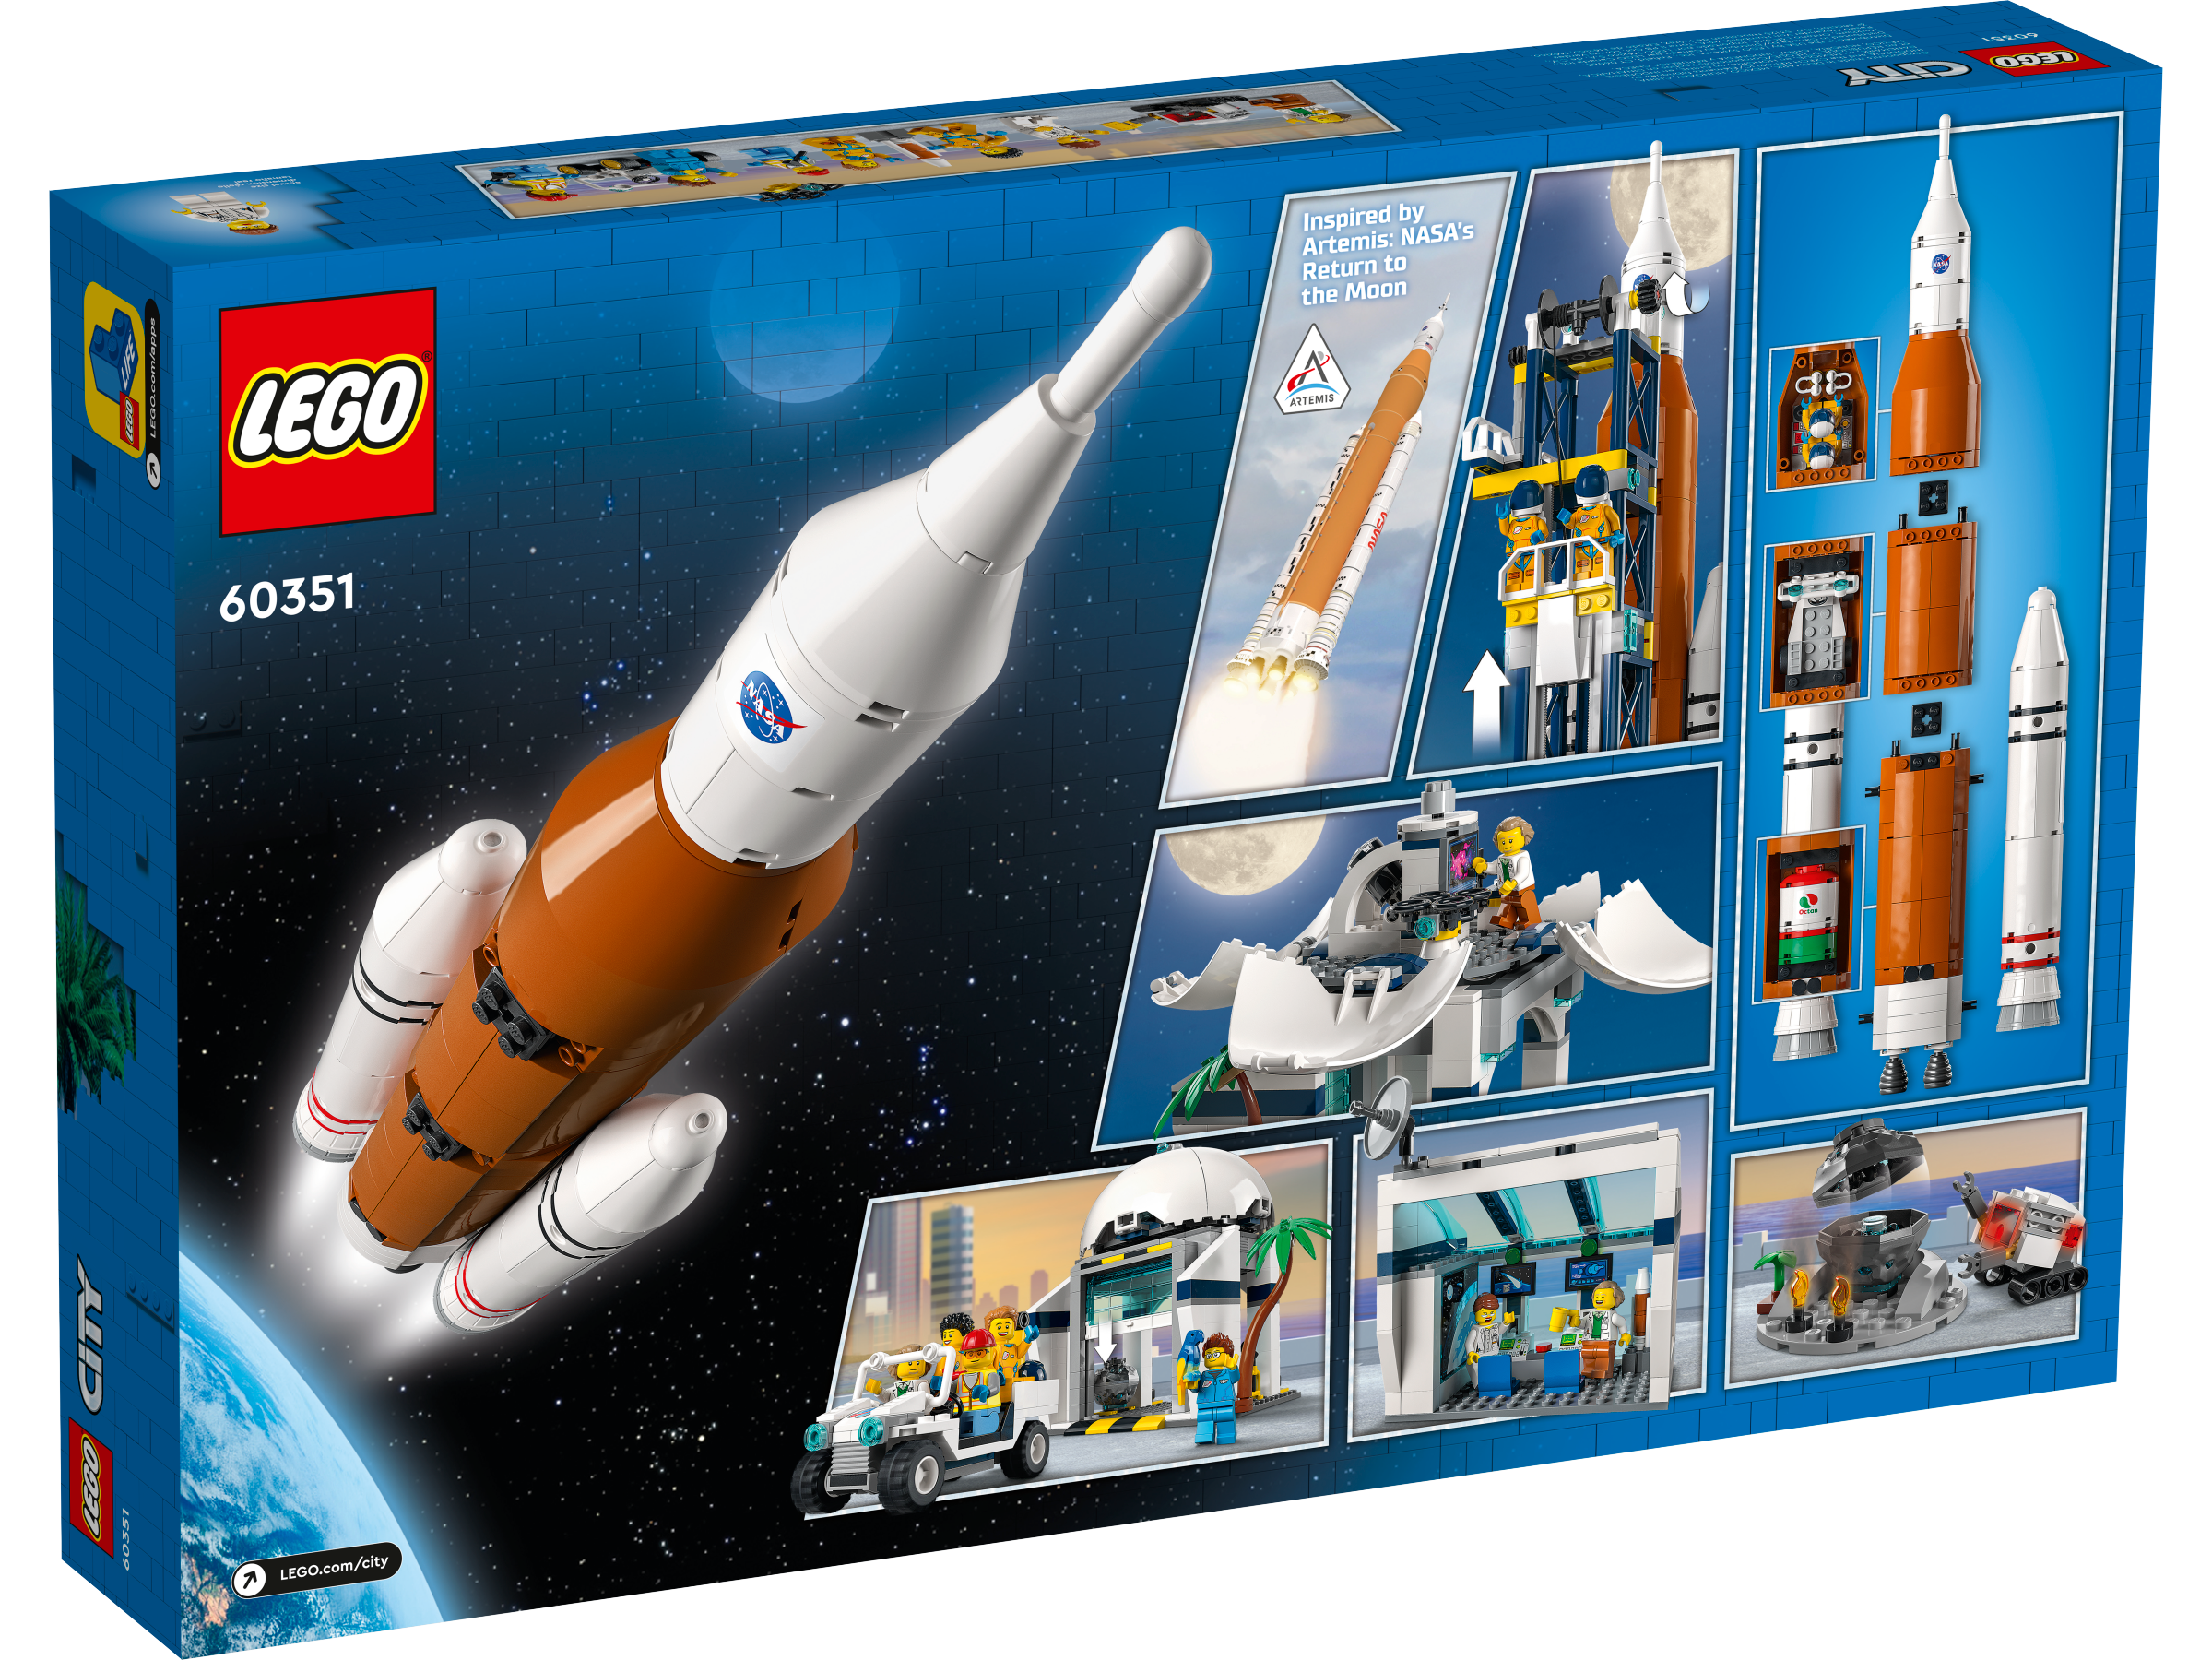 LEGO City Space Port Rocket Launch Center 60351 by LEGO Systems